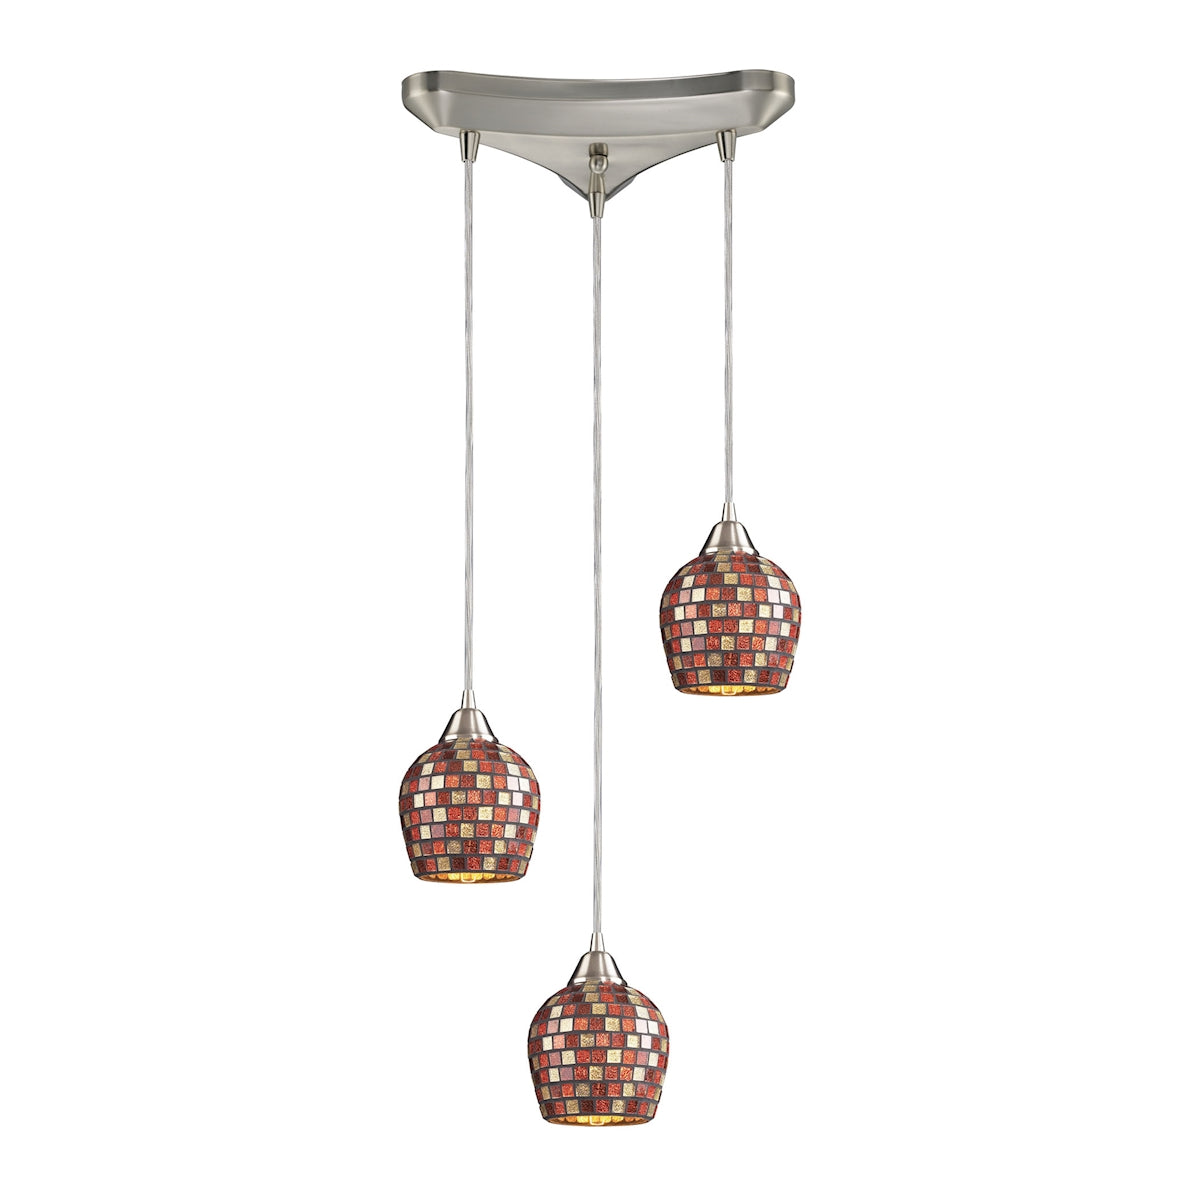 ELK Lighting 528-3MLT Fusion 3-Light Triangular Pendant Fixture in Satin Nickel with Multi-colored Mosaic Glass